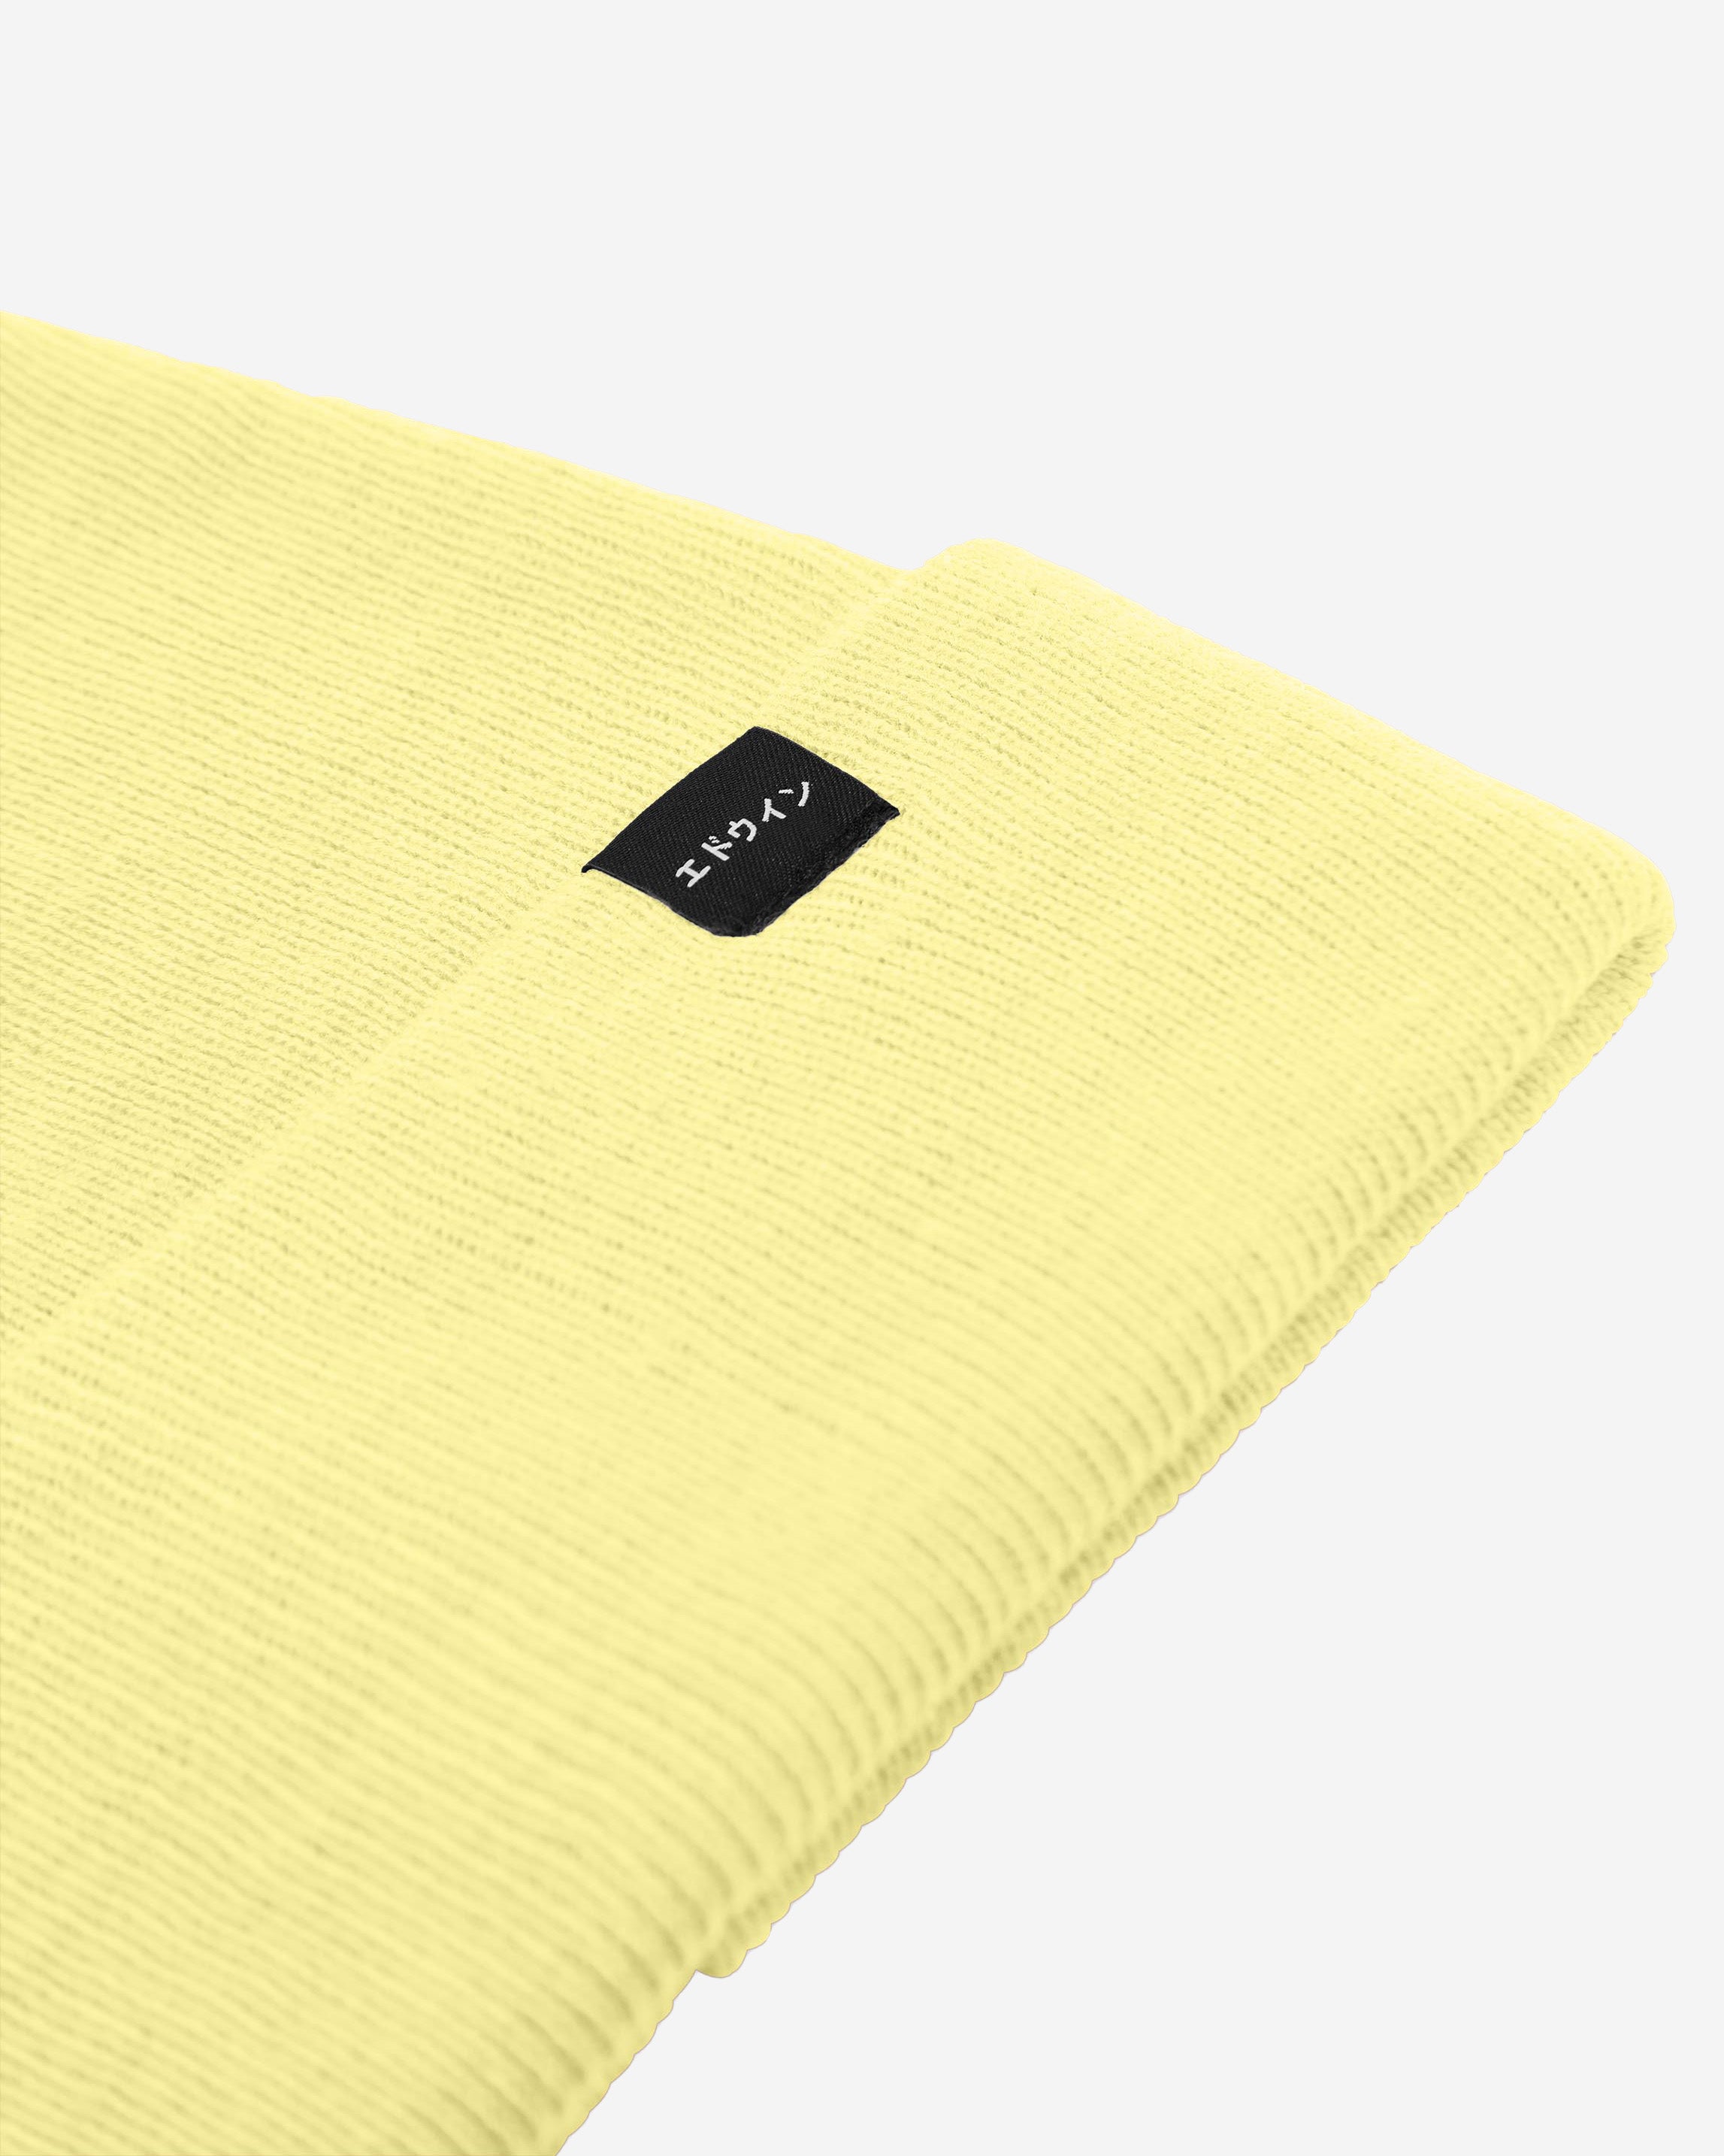 The EDWIN Watch Cap Beanie is a 100% Jersey Acrylic beanie in a yellow colourway Made in Marocco Garment Washed Jersey Knit Double Layer Turn-up part Jersey Knit, 100% Acrylic, 5GG